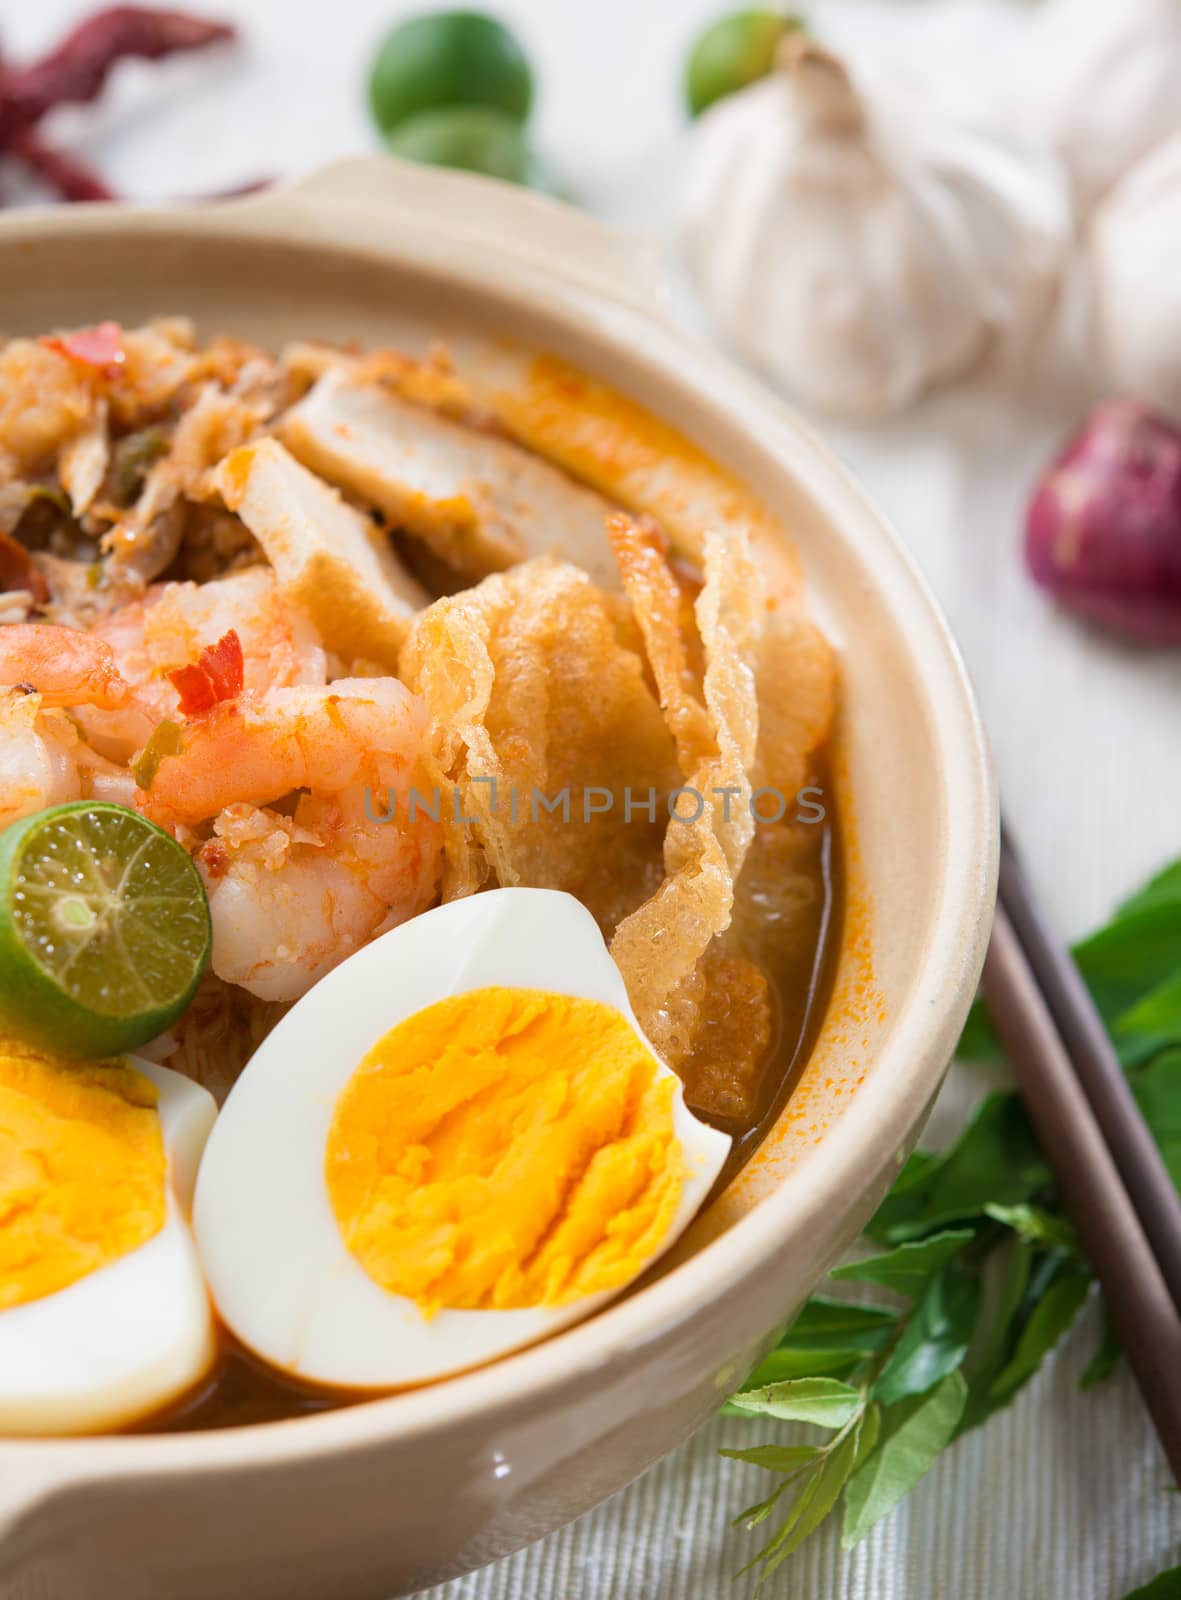 Prawn noodles or prawn mee. Famous Singapore food spicy fresh cooked har mee in clay pot with hot steam. Asian cuisine.